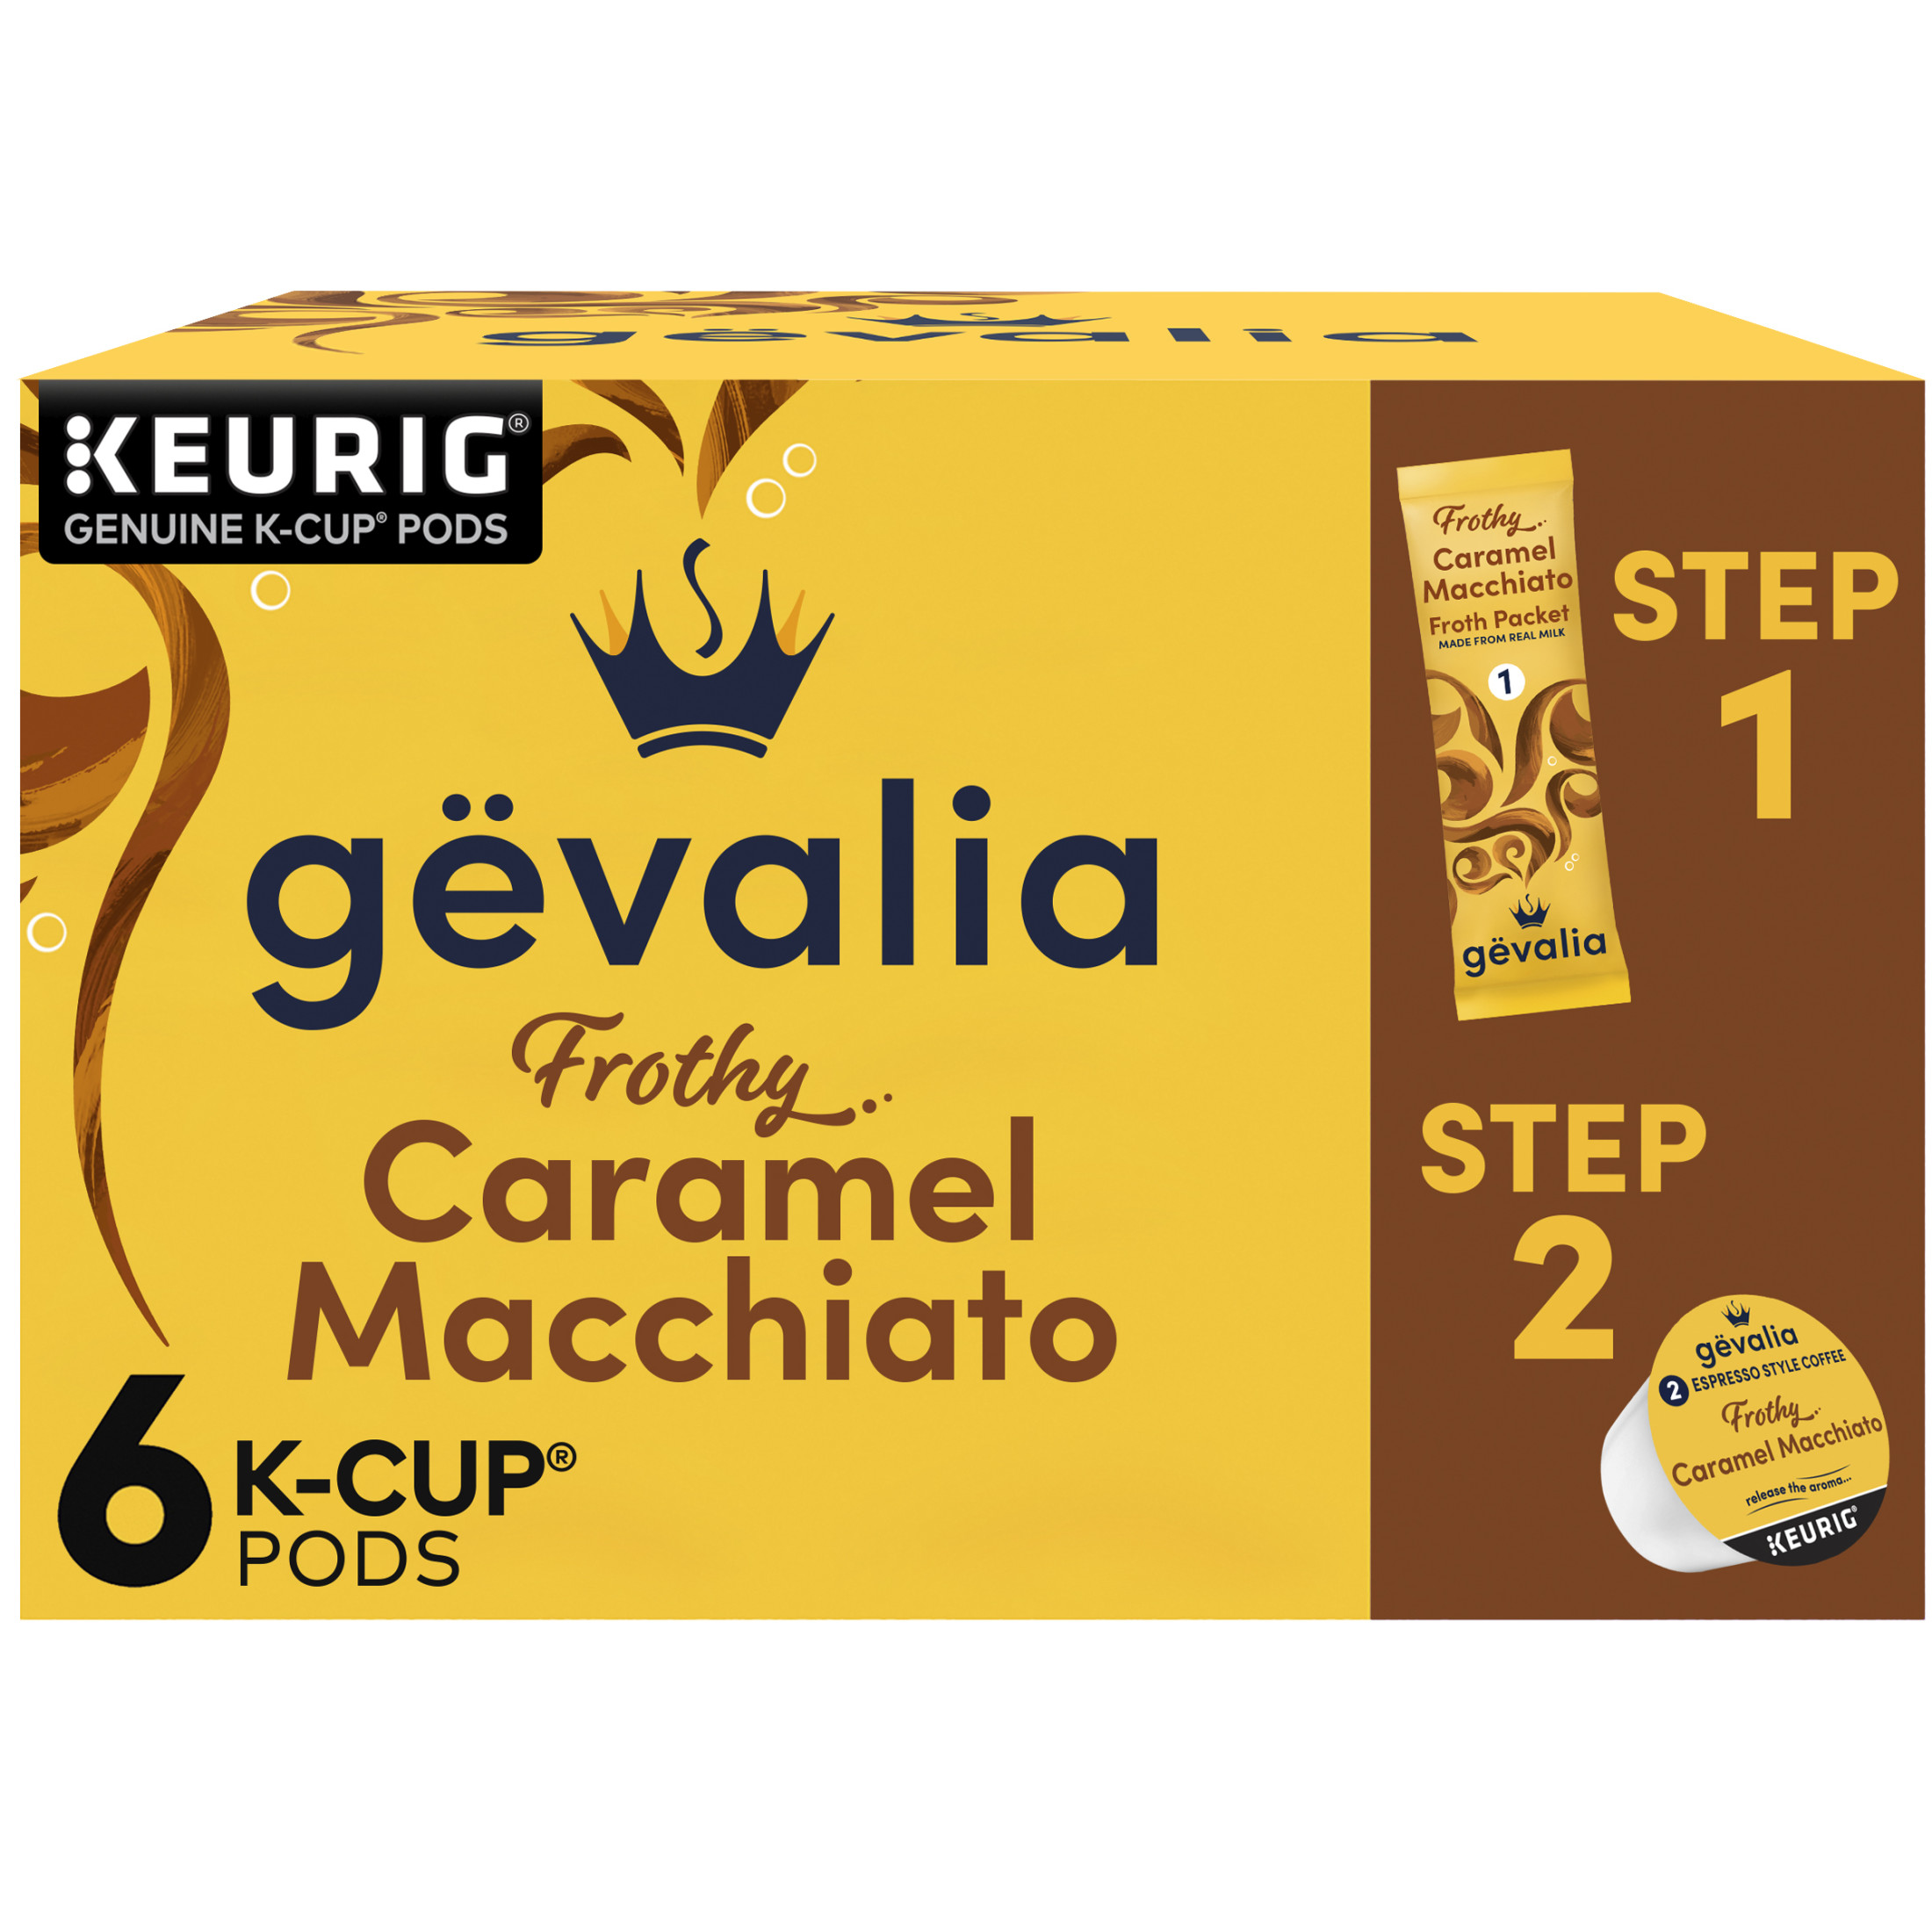 Gevalia Frothy 2-Step Caramel Macchiato Espresso K-Cup® Coffee Pods & Froth Packets Kit, 6 ct Box - image 1 of 14